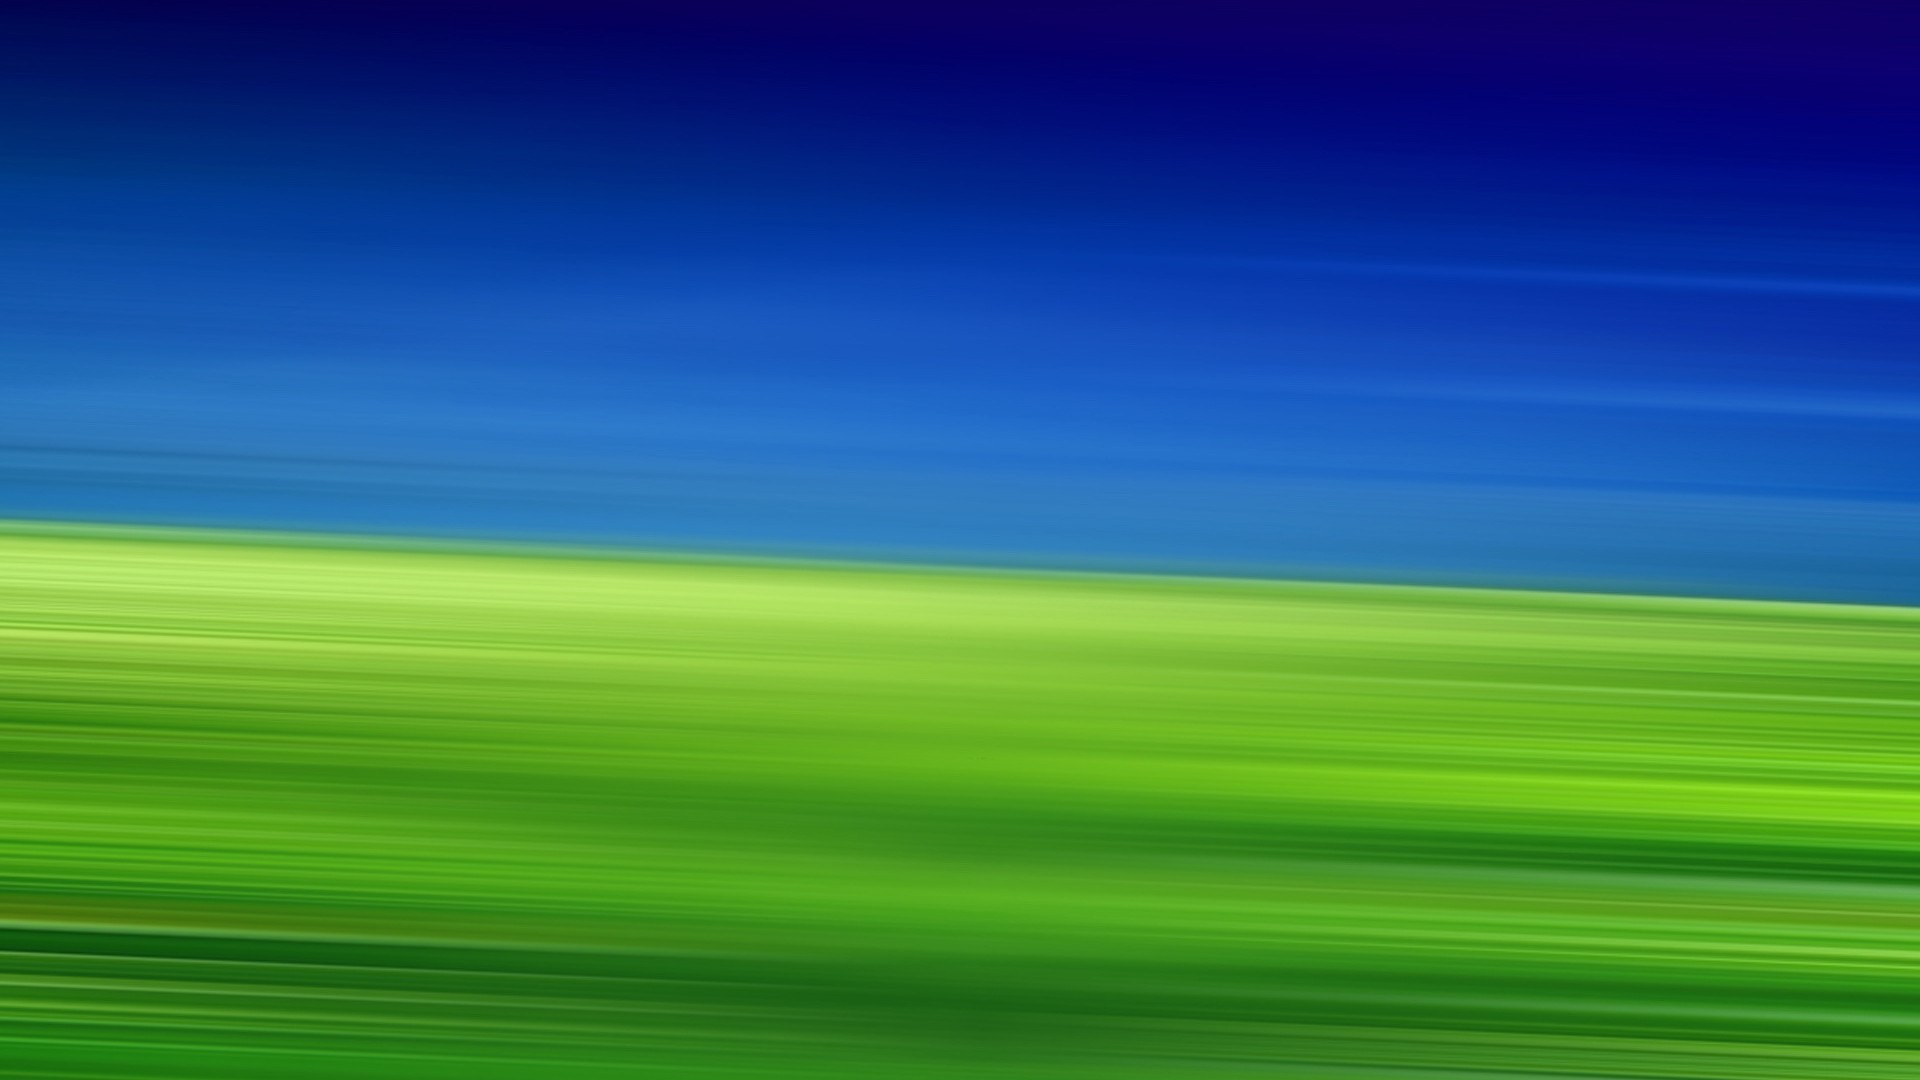 Wallpaper Blue and Green HD With Resolution 1920X1080 pixel. You can make this wallpaper for your Desktop Computer Backgrounds, Mac Wallpapers, Android Lock screen or iPhone Screensavers